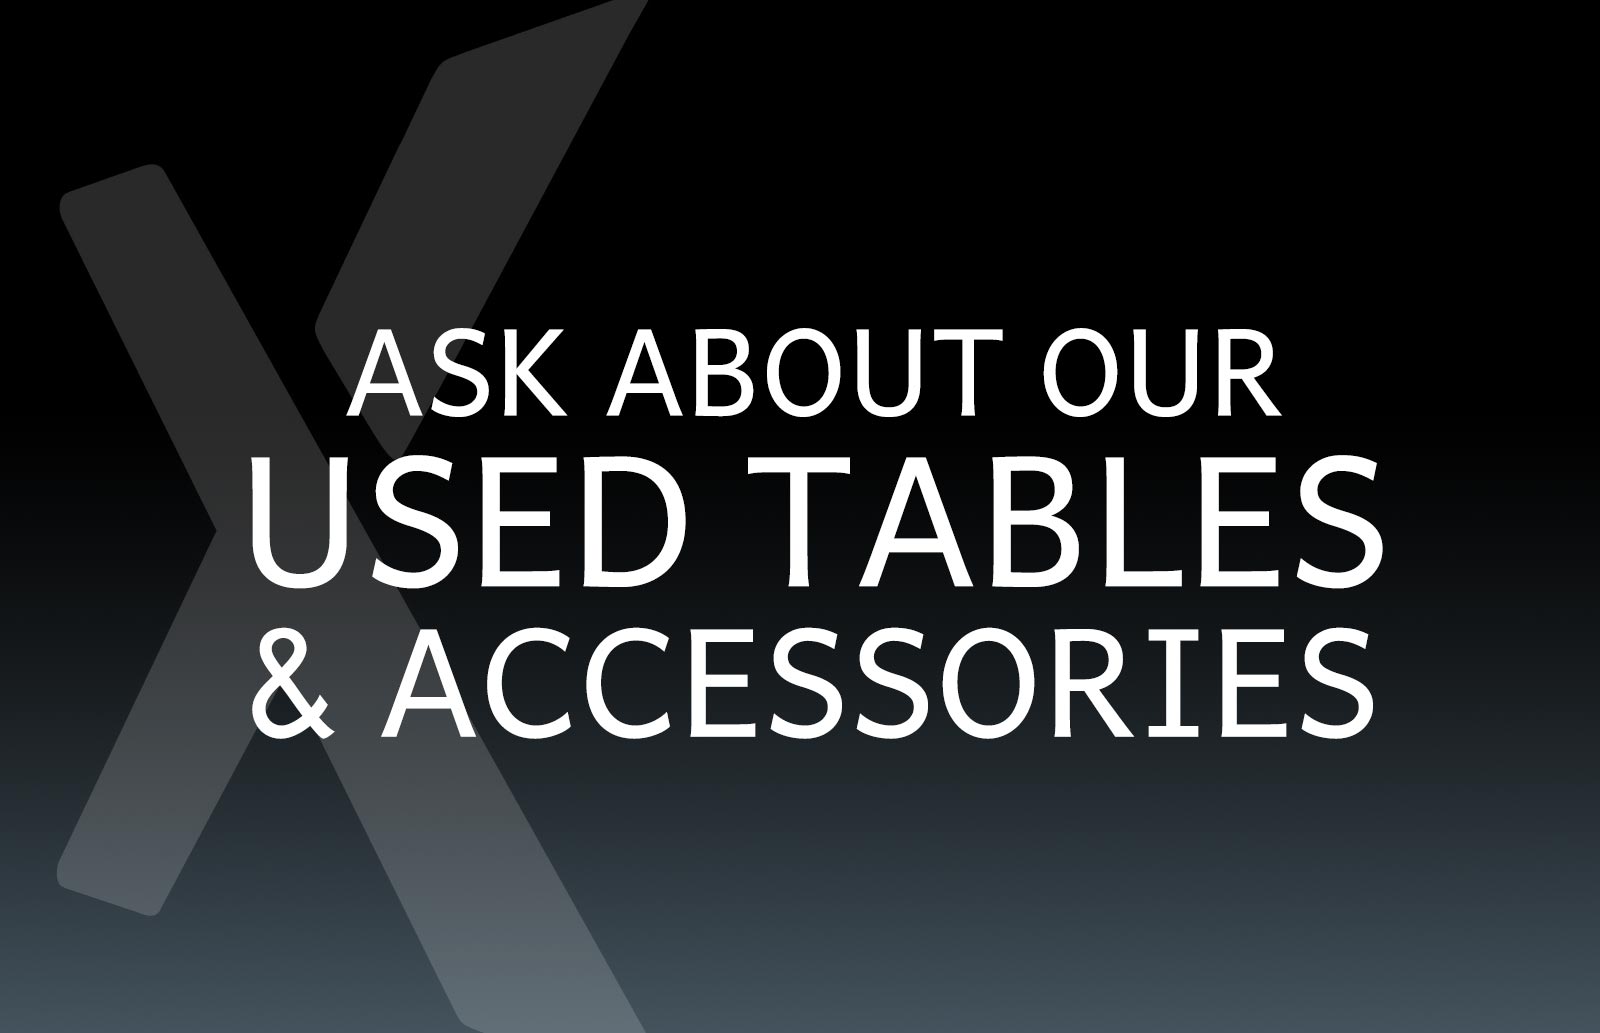 Used Tables and Accessories at Xtreme Xhibits